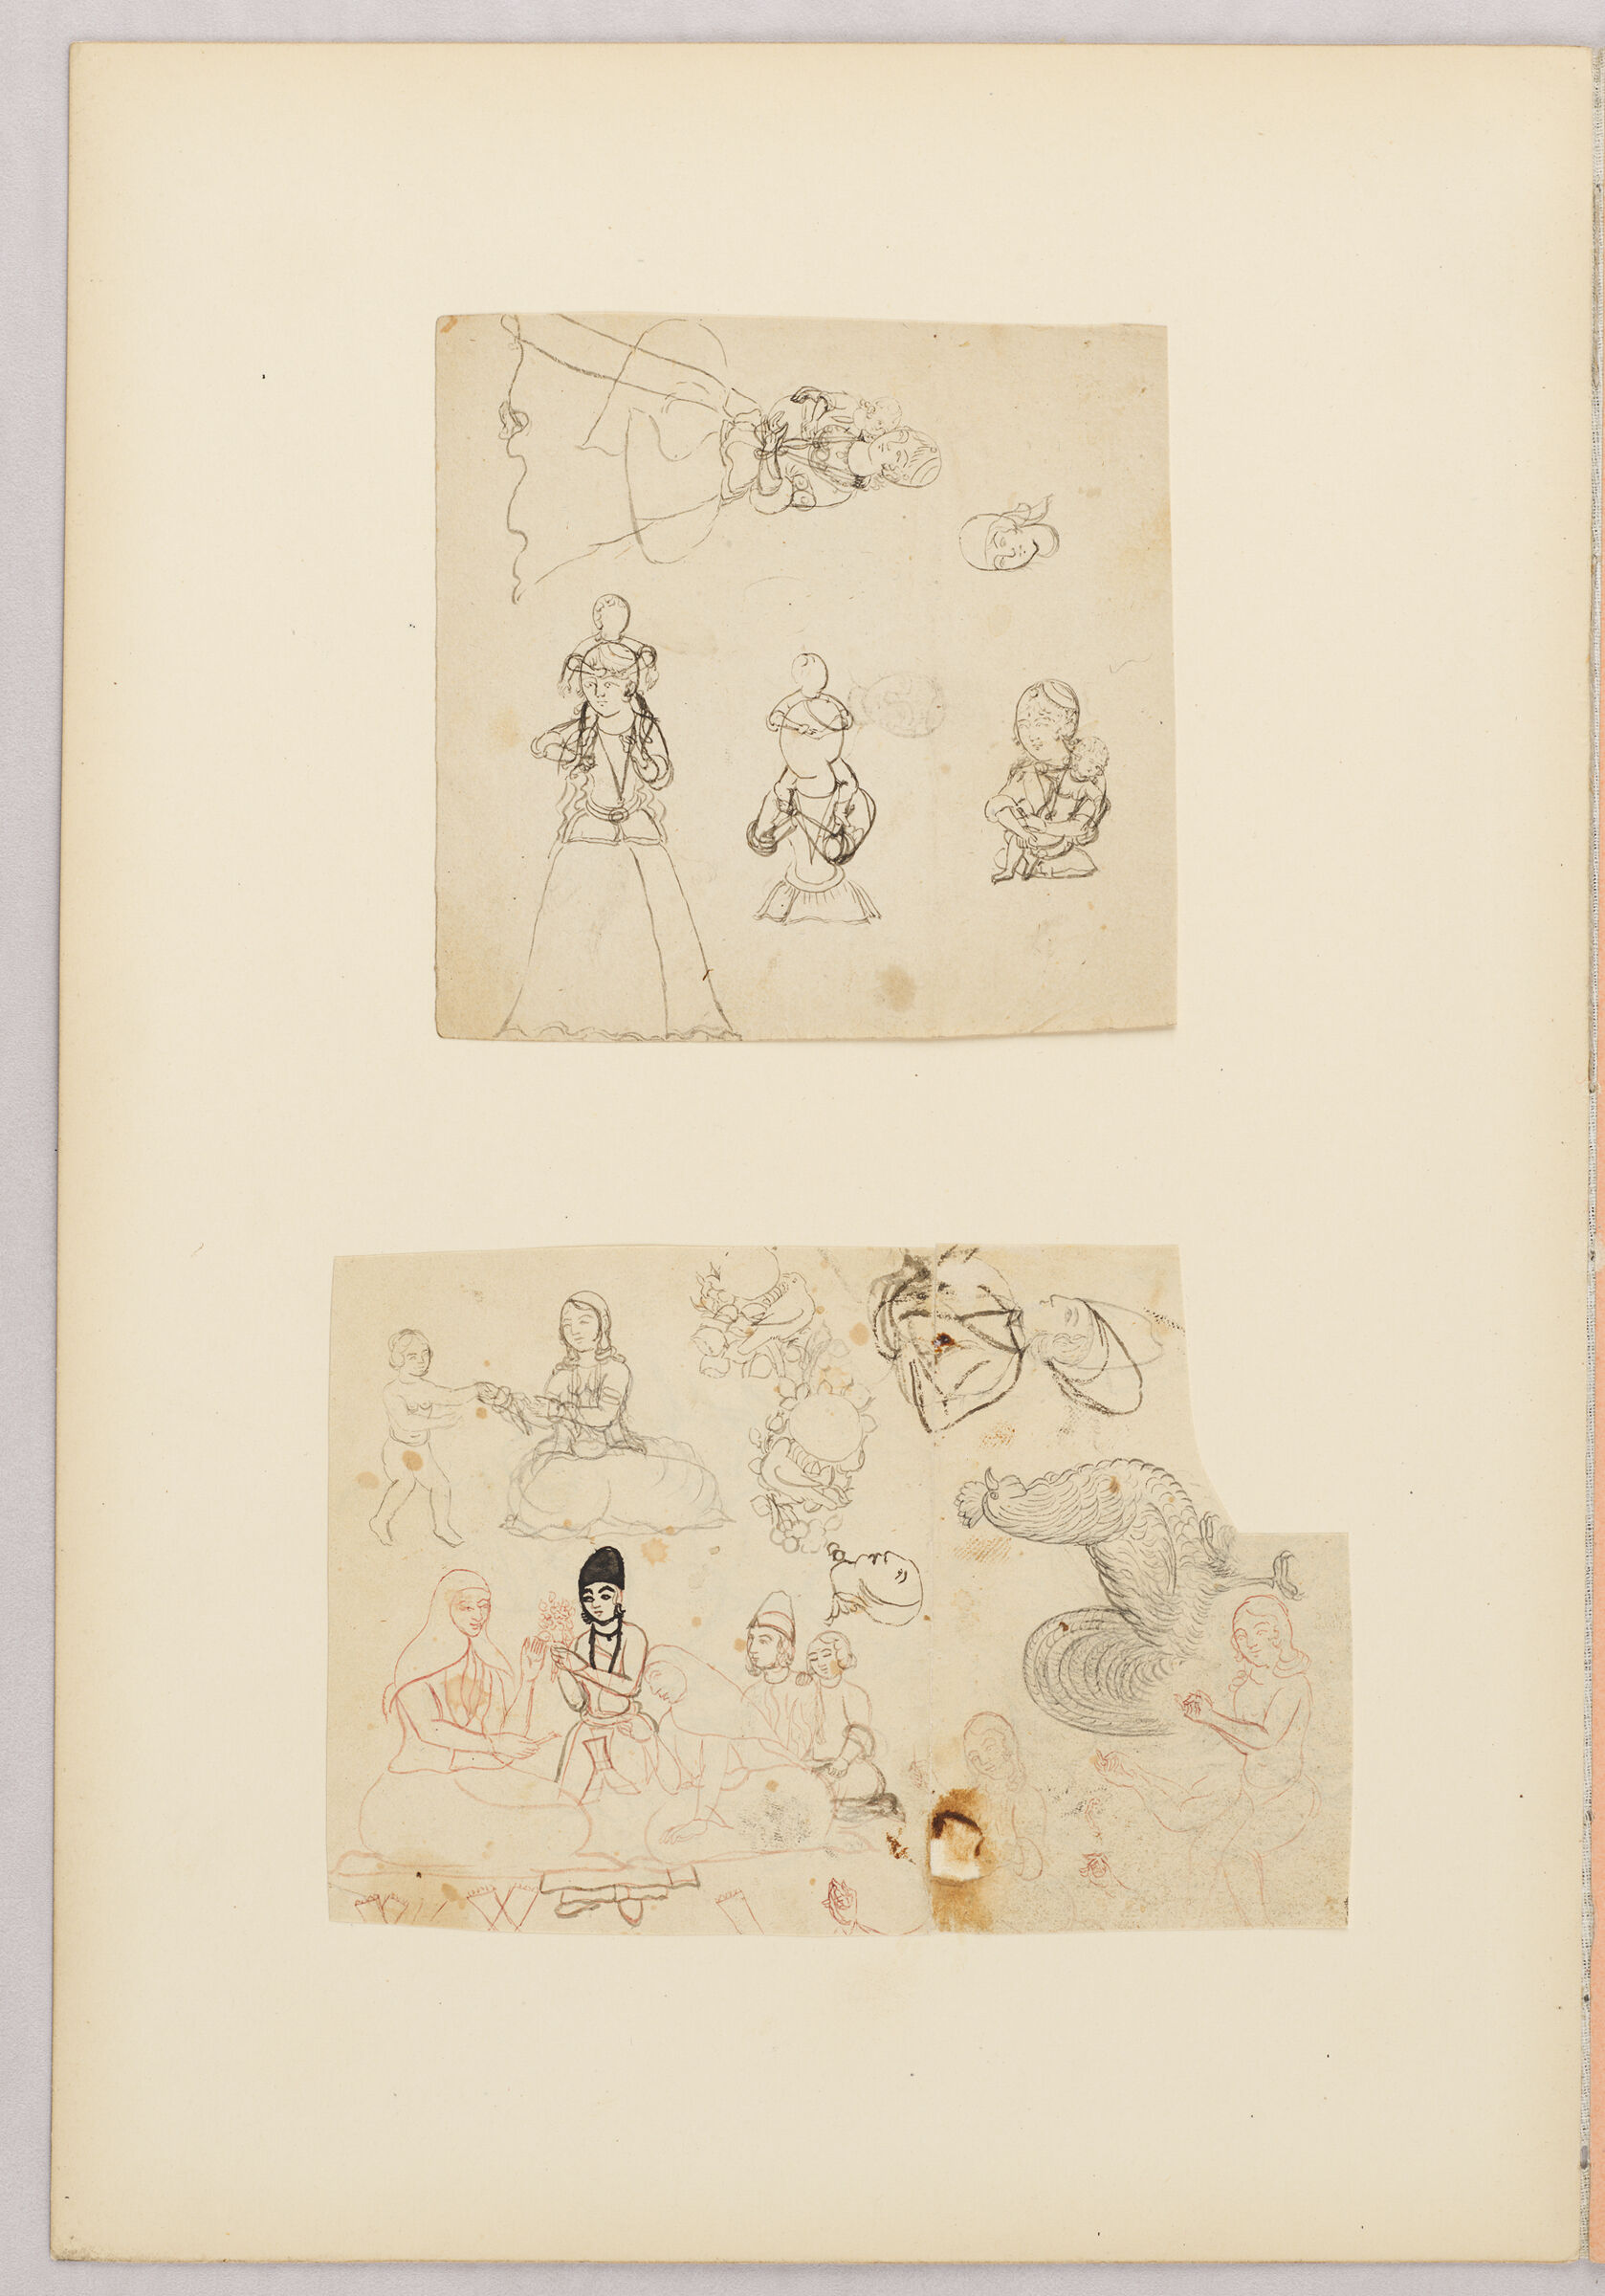 Folio 37 From An Album Of Drawings And Paintings: Two Sheets With Sketches Of People, Animals, And Bird And Flower Motifs (Recto); Blank Page (Verso)